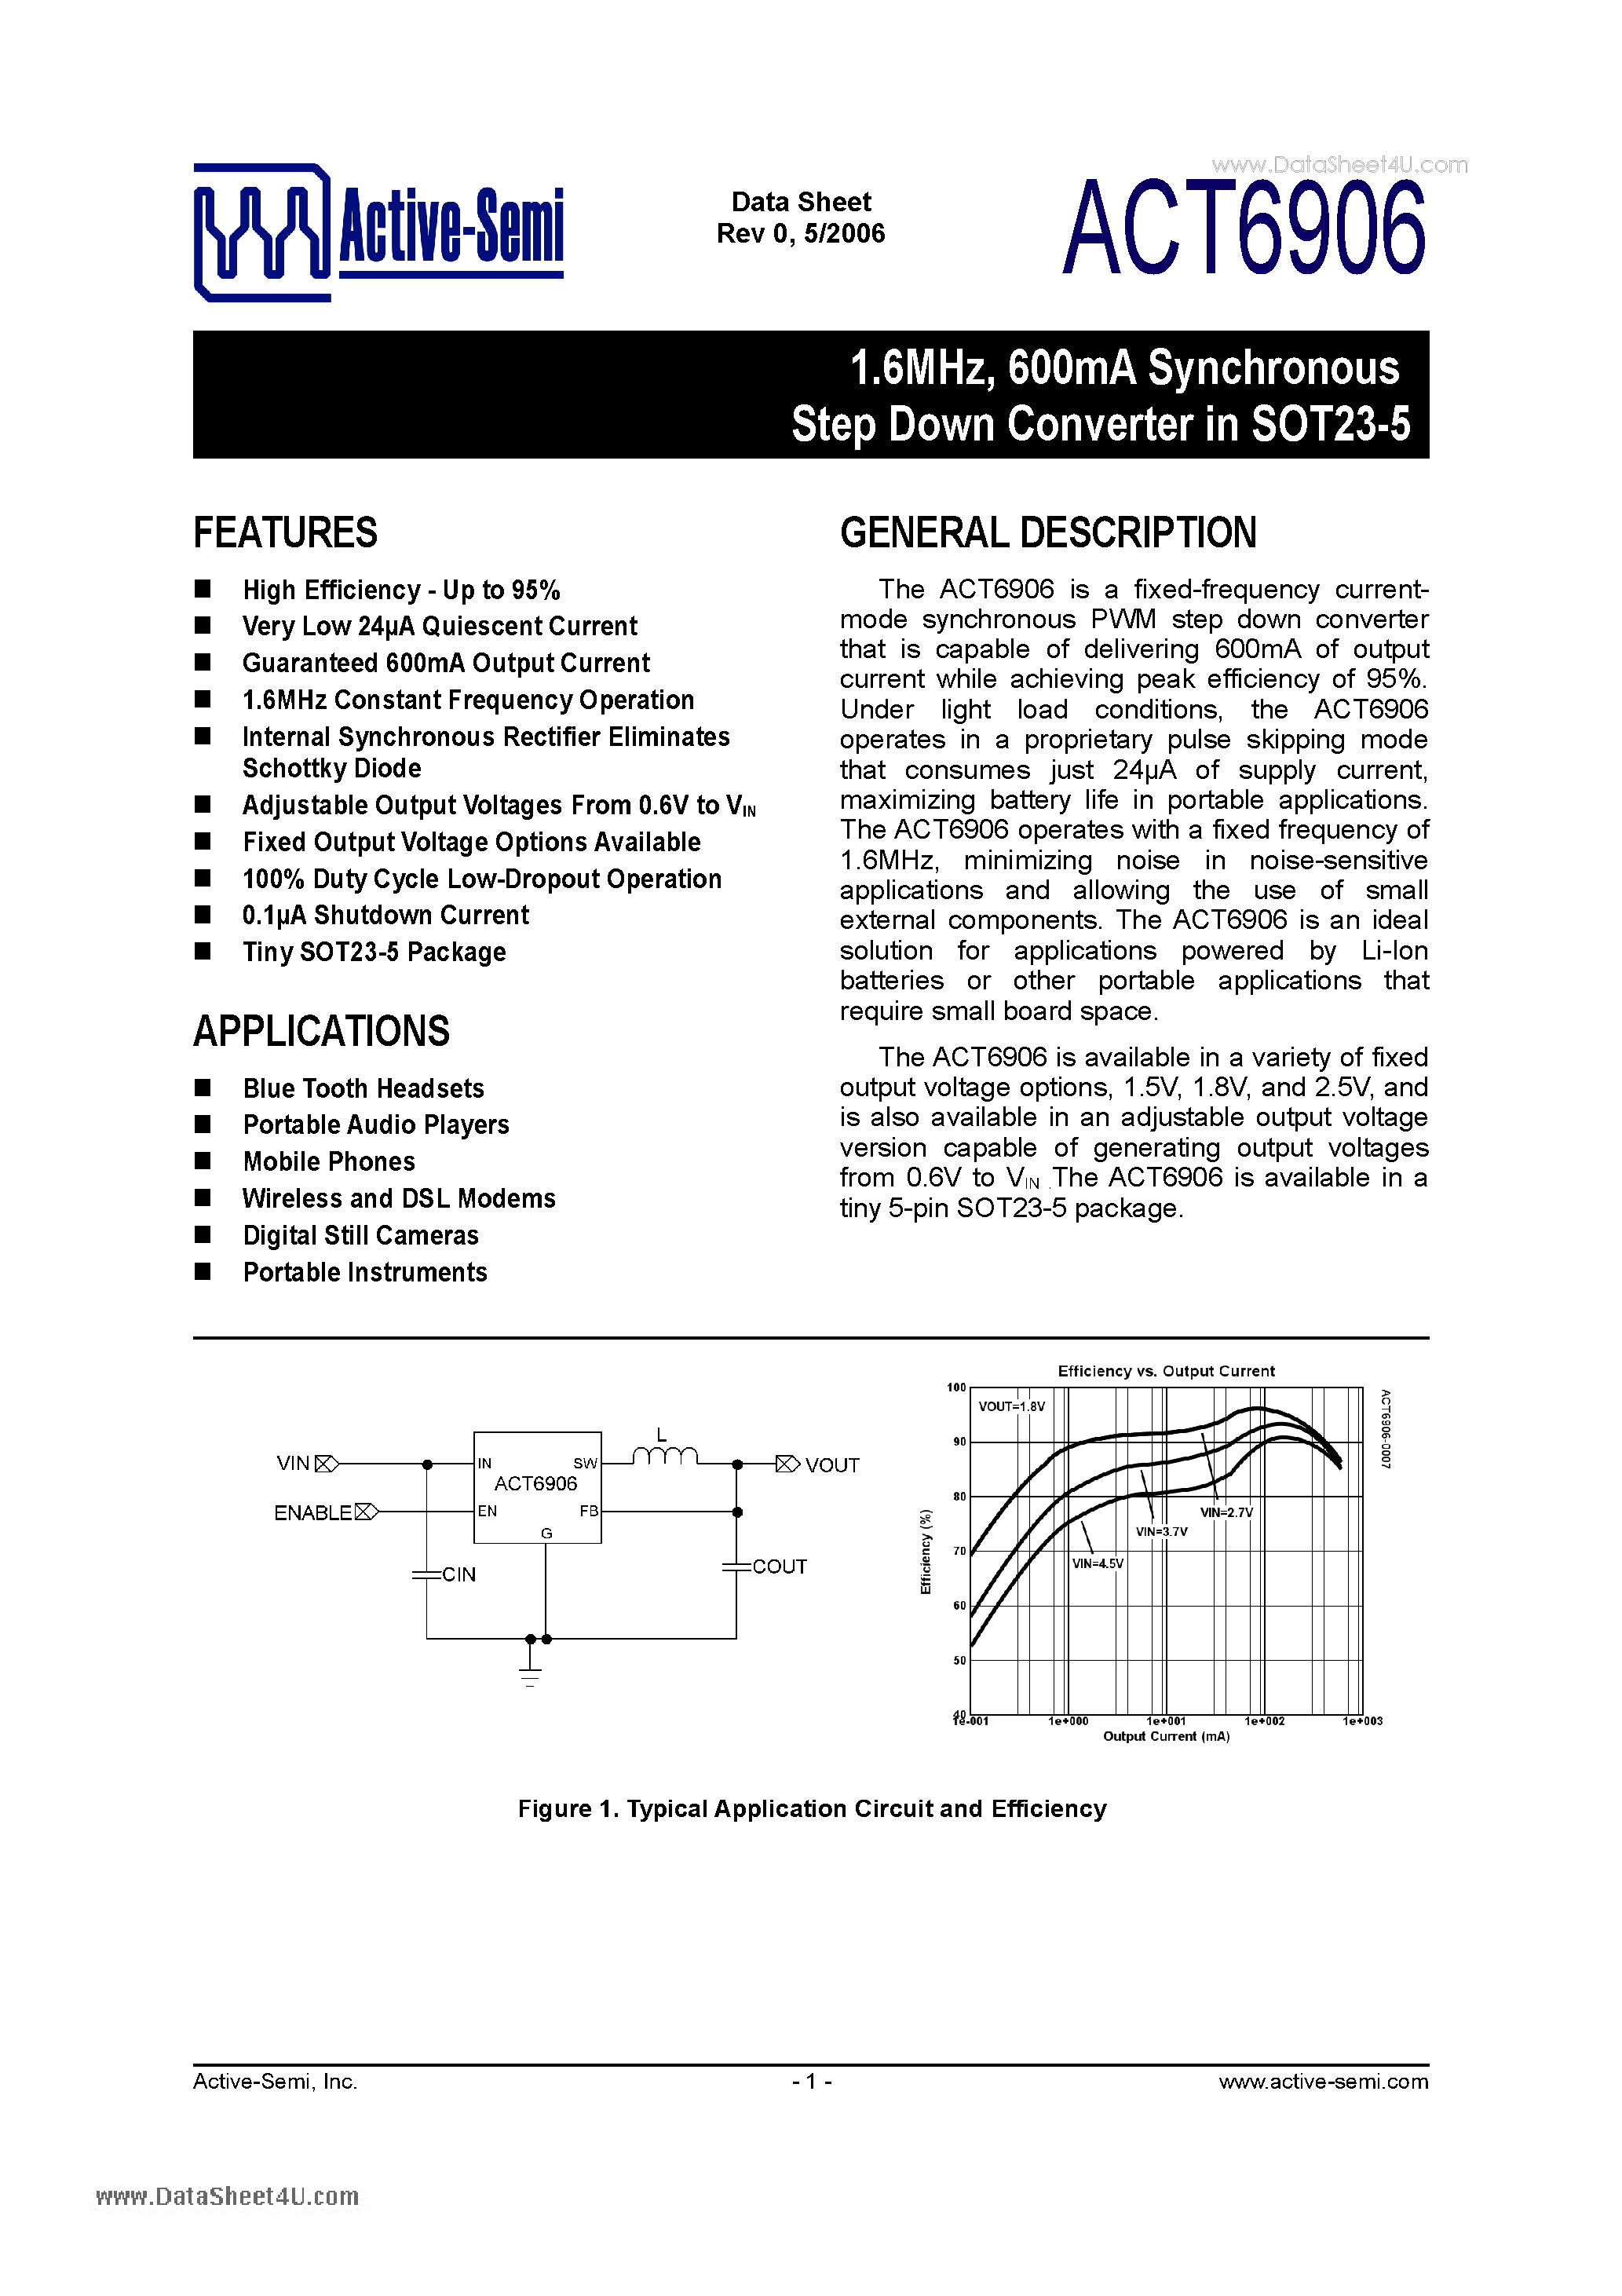 Datasheet ACT6906 - 600mA Synchronous Step Down Converter page 1